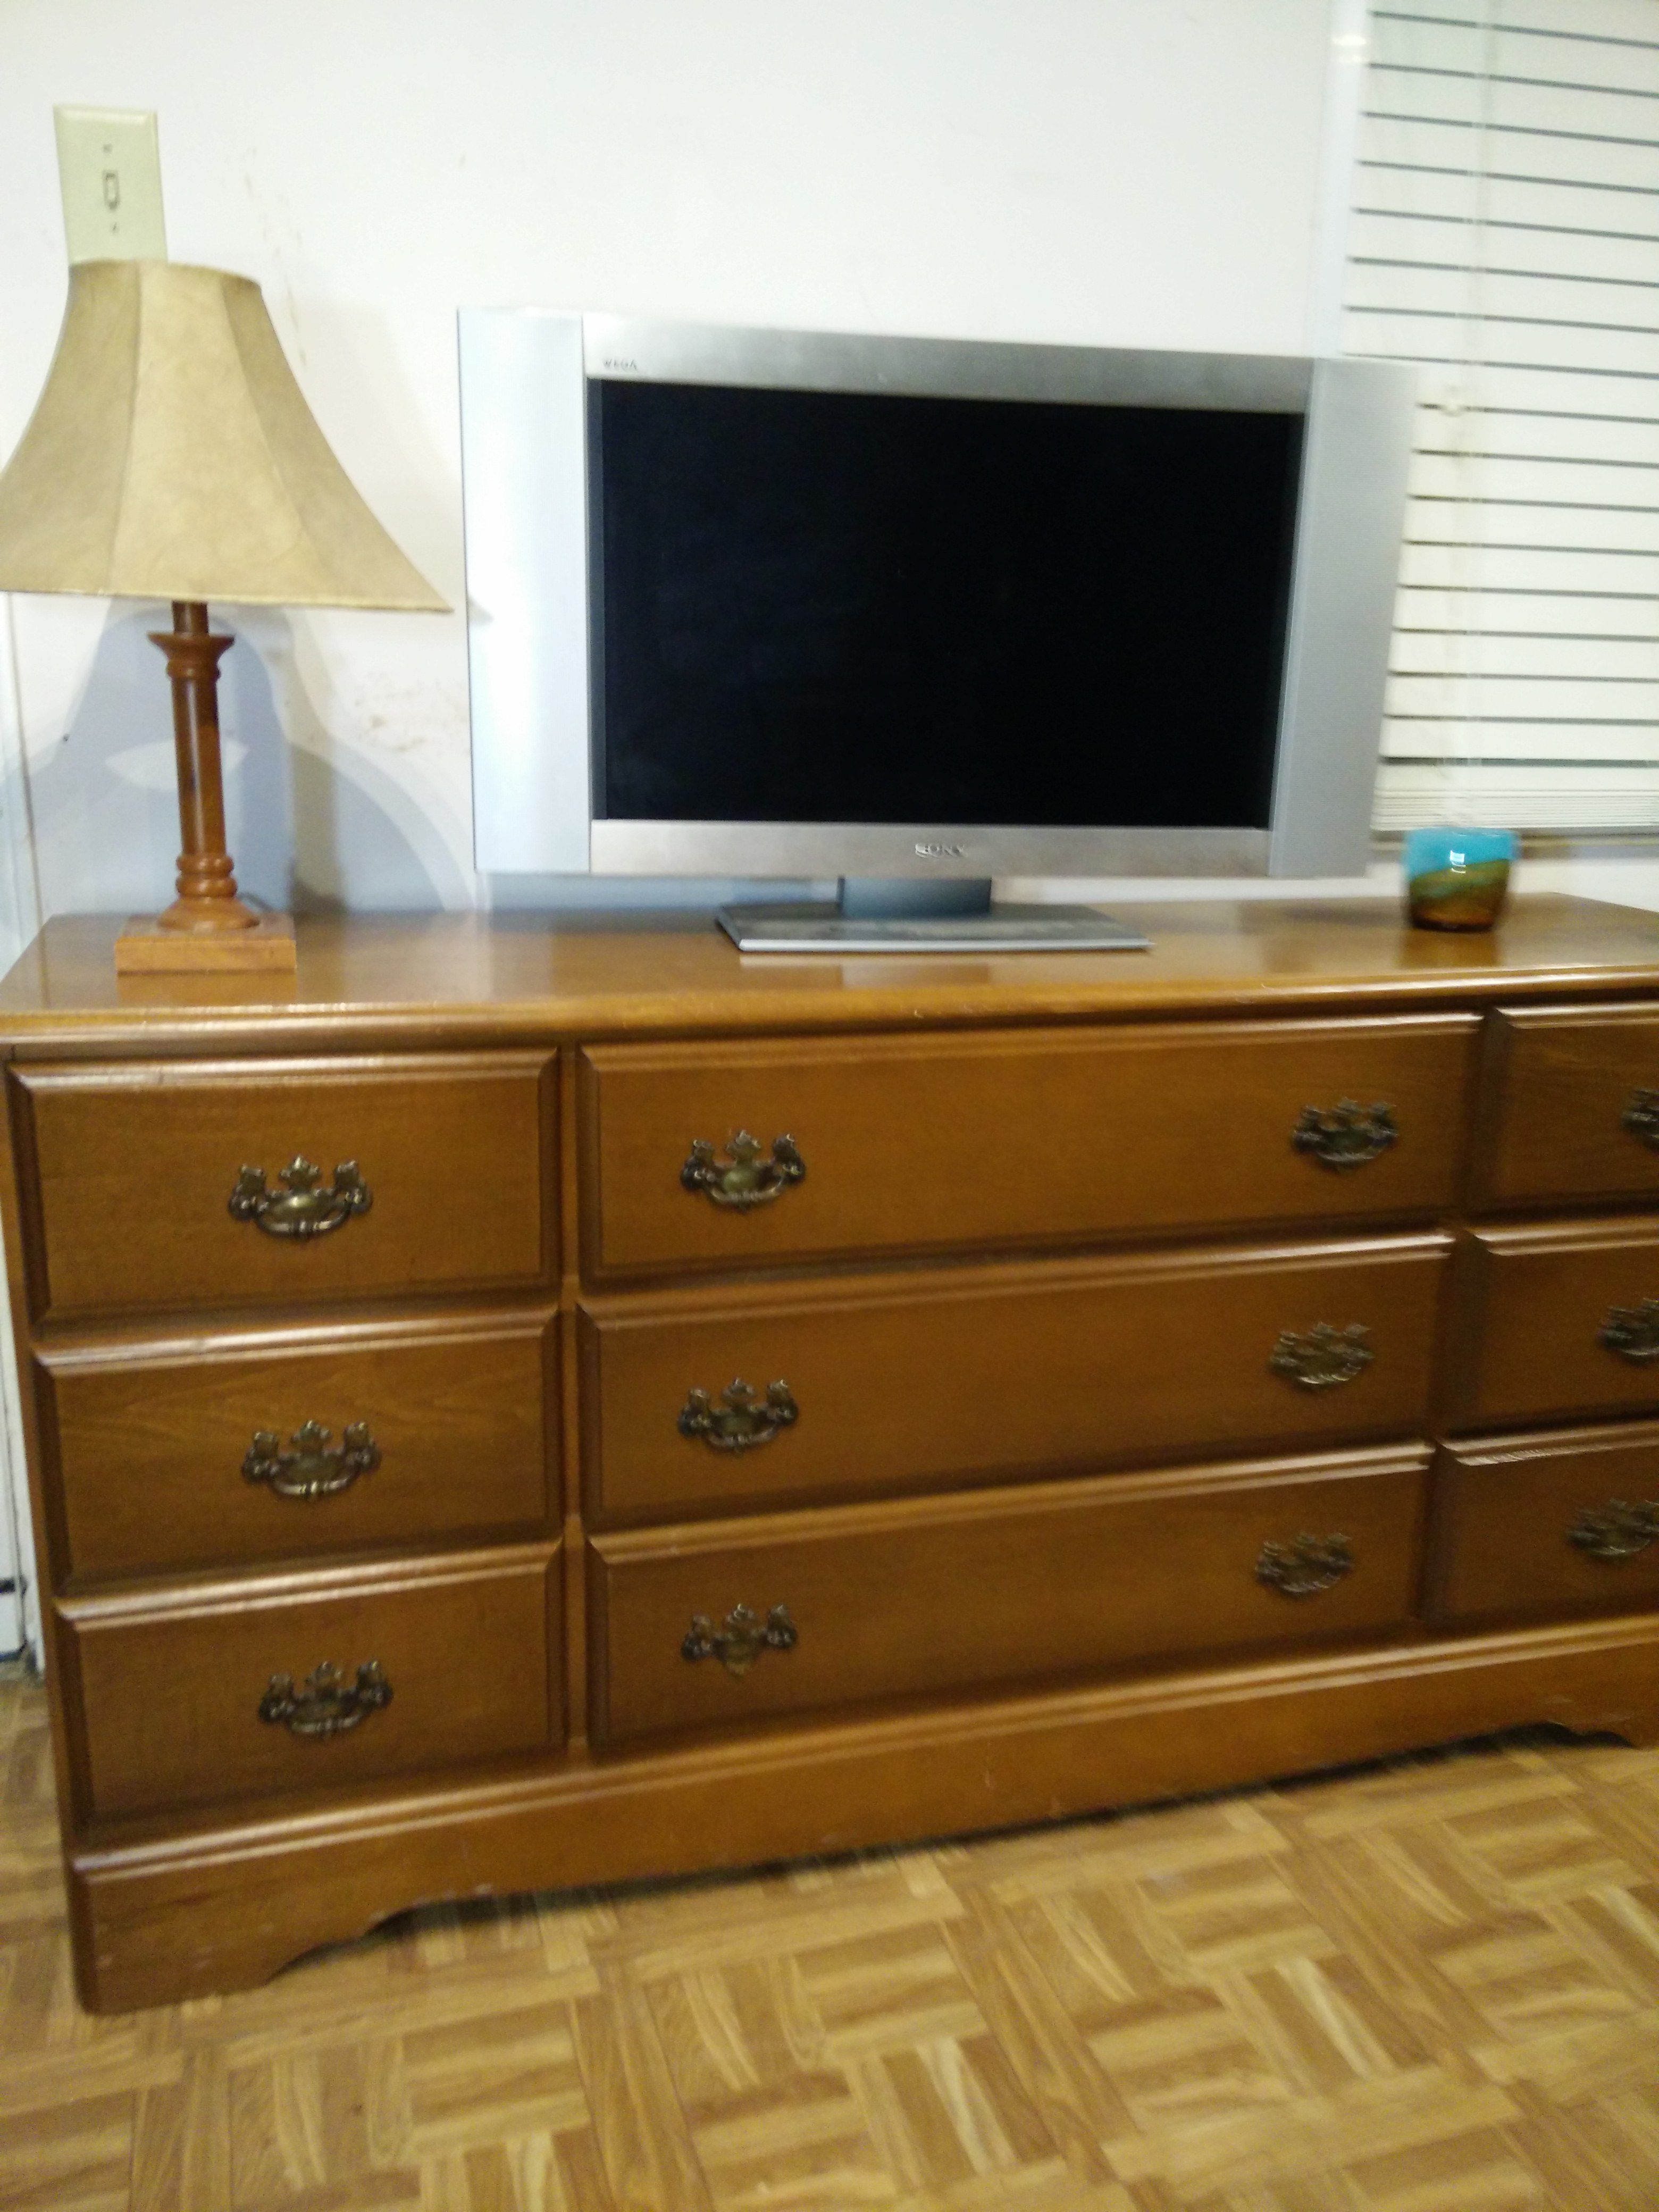 Nice solid wood dresser/ buffet/ TV stand in very good condition, all the 9 drawers sliding smoothly,